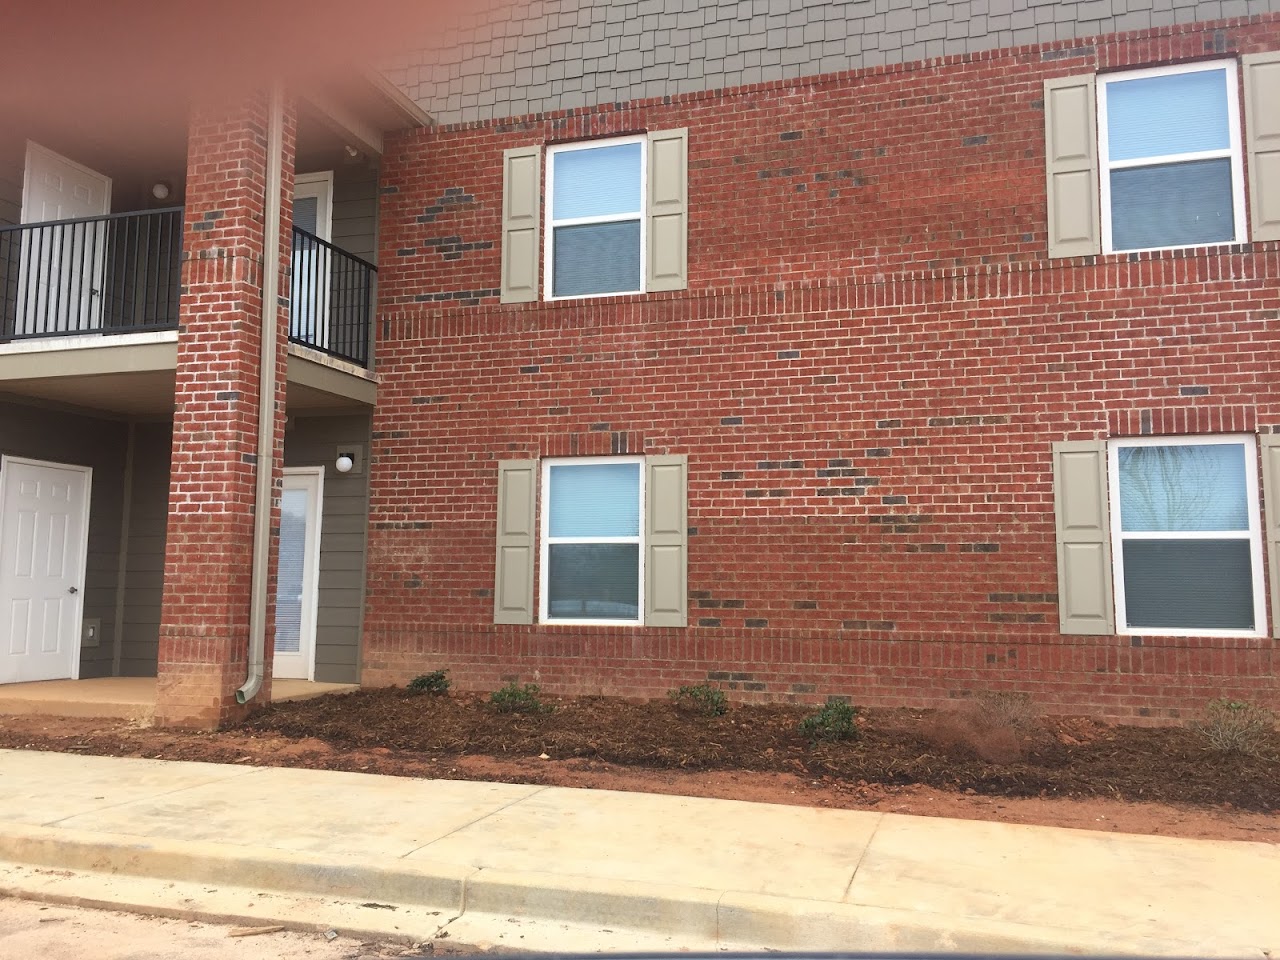 Photo of THE REGENCY AT BLACKSTOCK. Affordable housing located at 423 VERDERY COURT SPARTANBURG, SC 29301